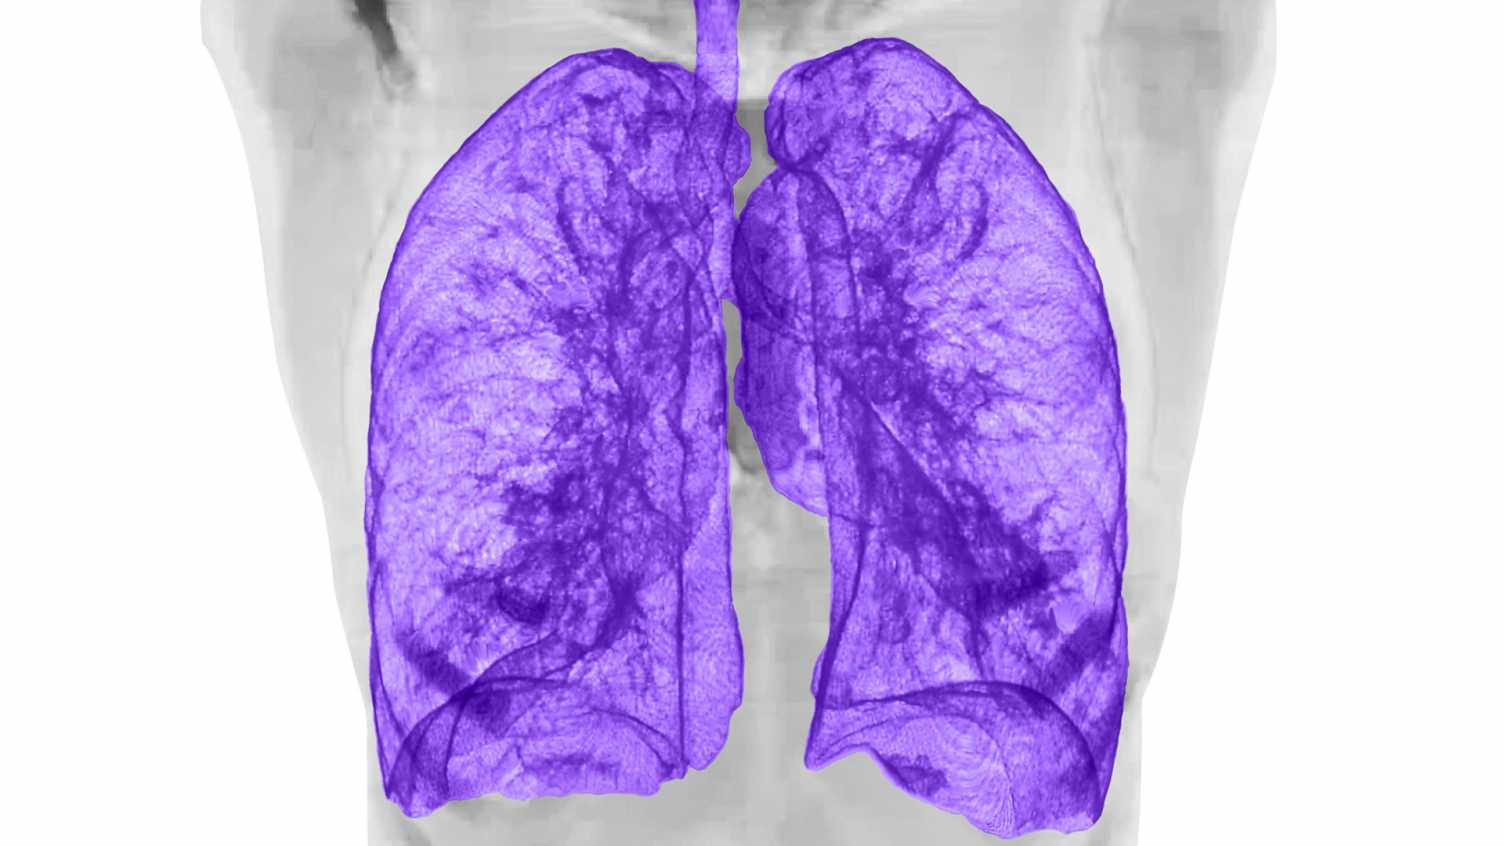 Pioneering detailed lung scans without radiation | Research | The University of Sheffield